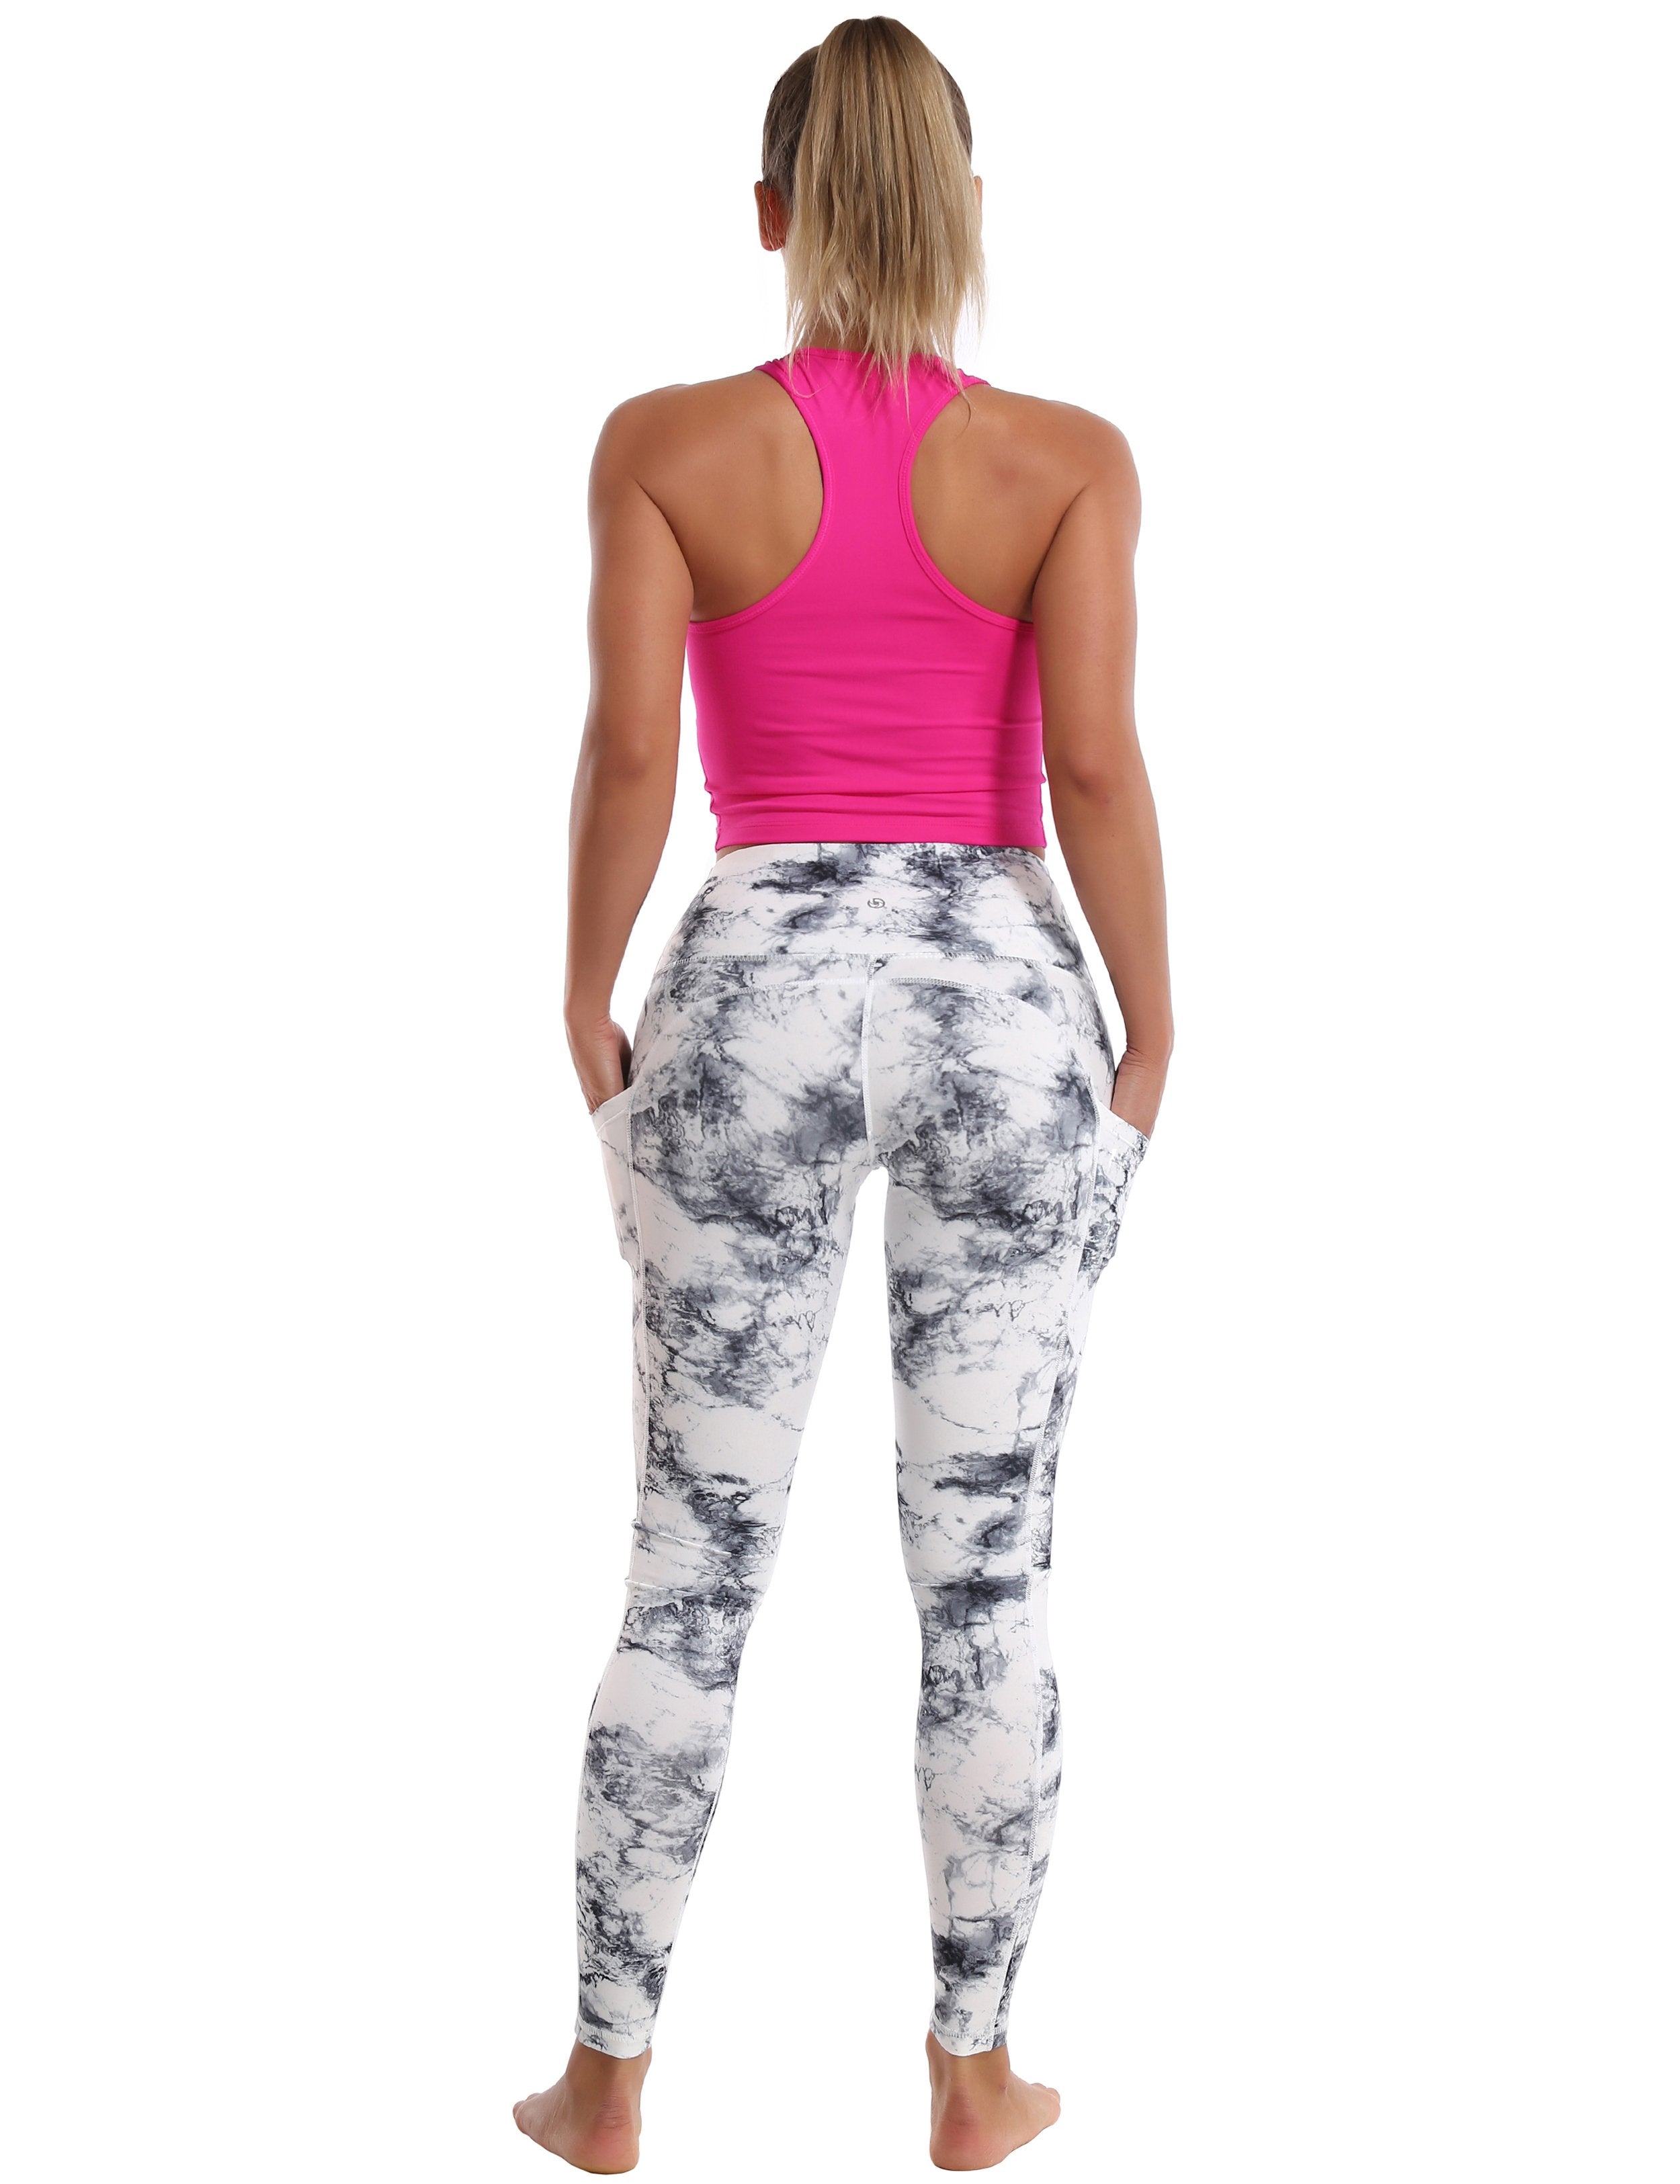 Hip Line Side Pockets Golf Pants arabescato Sexy Hip Line Side Pockets 78%Polyester/22%Spandex Fabric doesn't attract lint easily 4-way stretch No see-through Moisture-wicking Tummy control Inner pocket